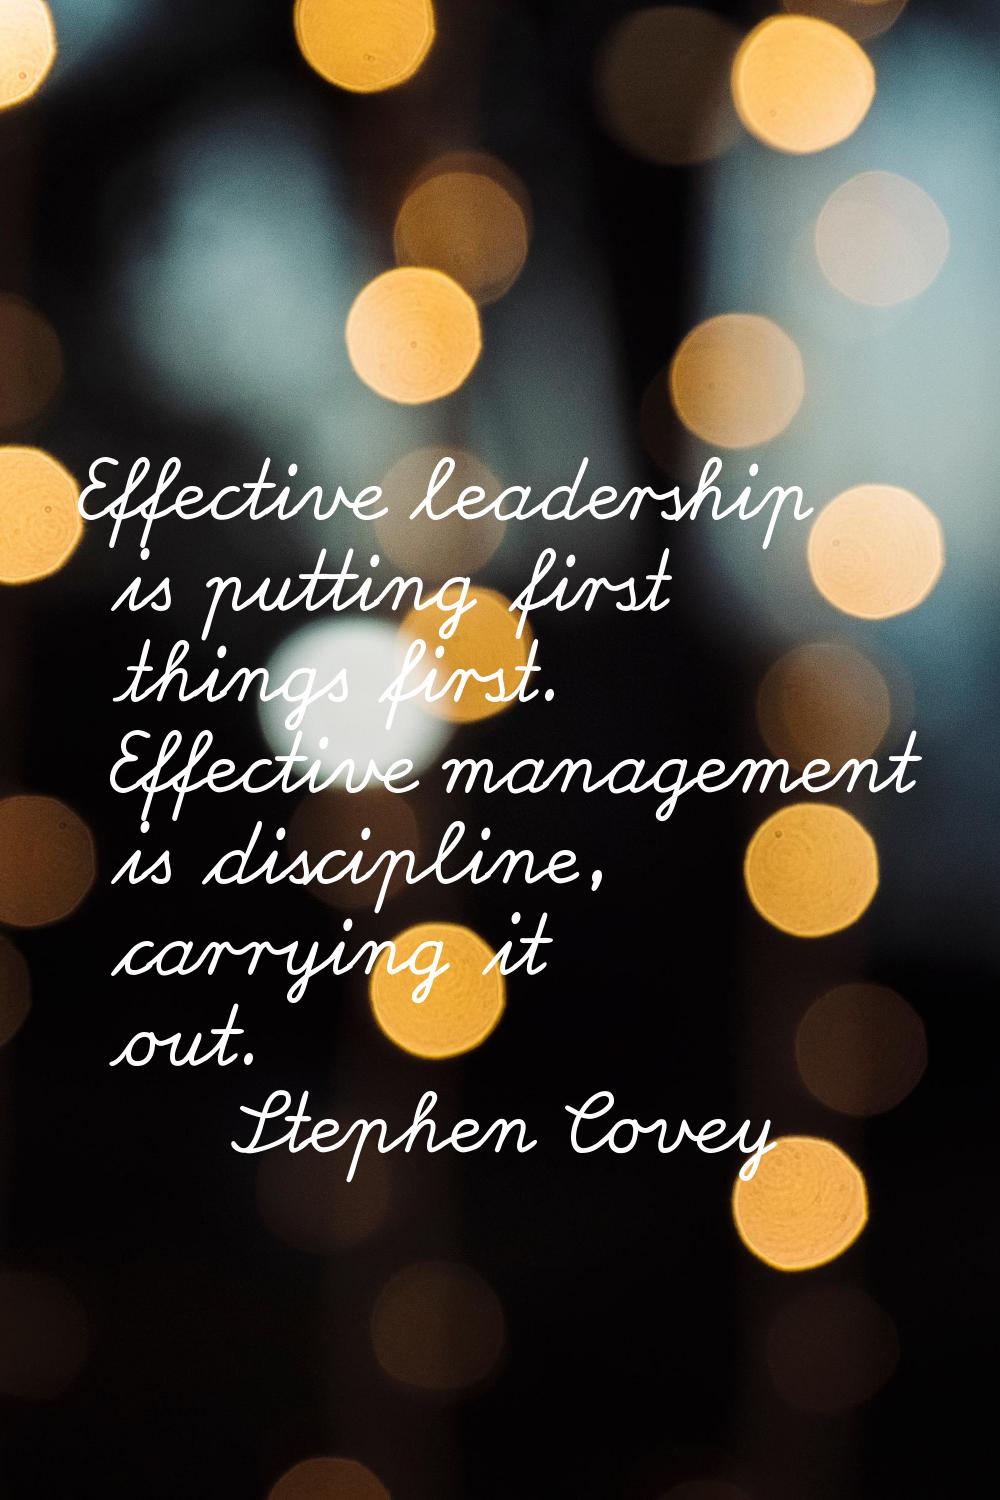 Effective leadership is putting first things first. Effective management is discipline, carrying it